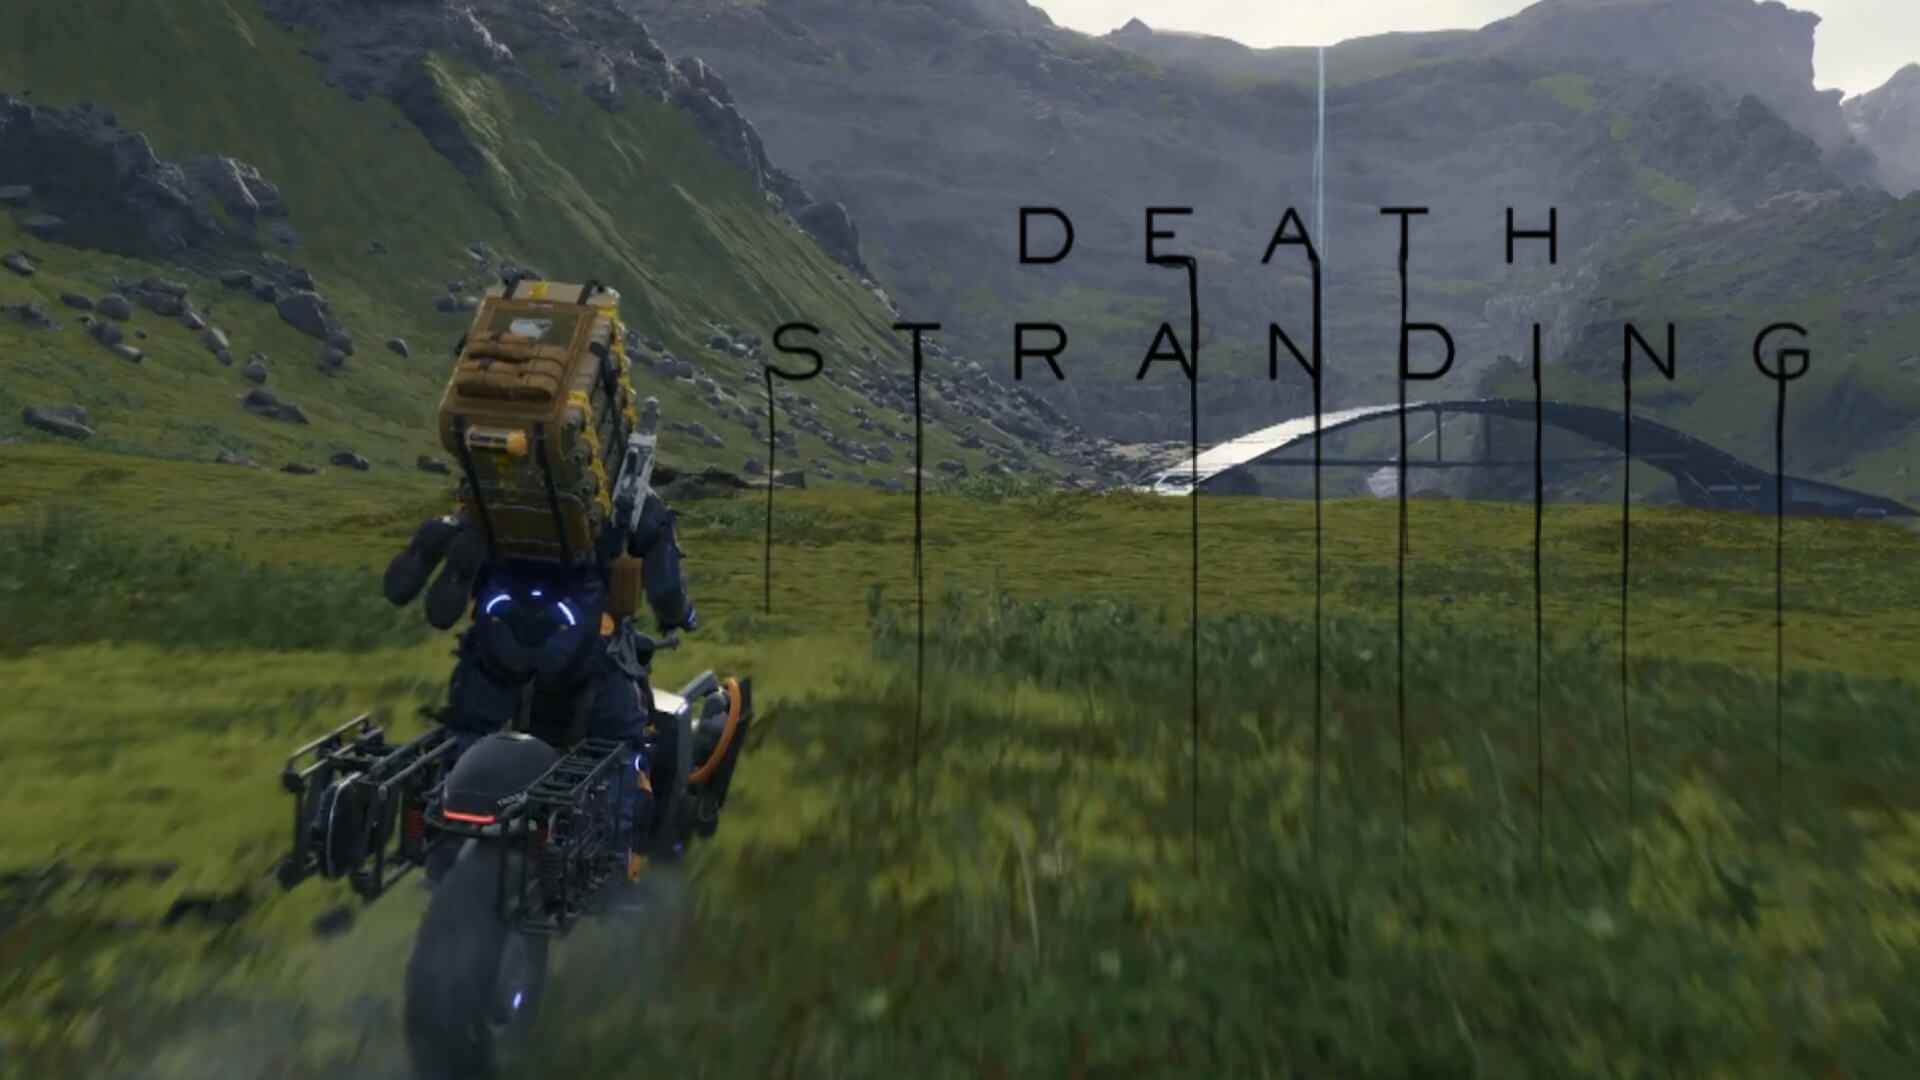 Death Stranding Update 1.06 Patch Notes and File Size Revealed (Nov. 26th Update)